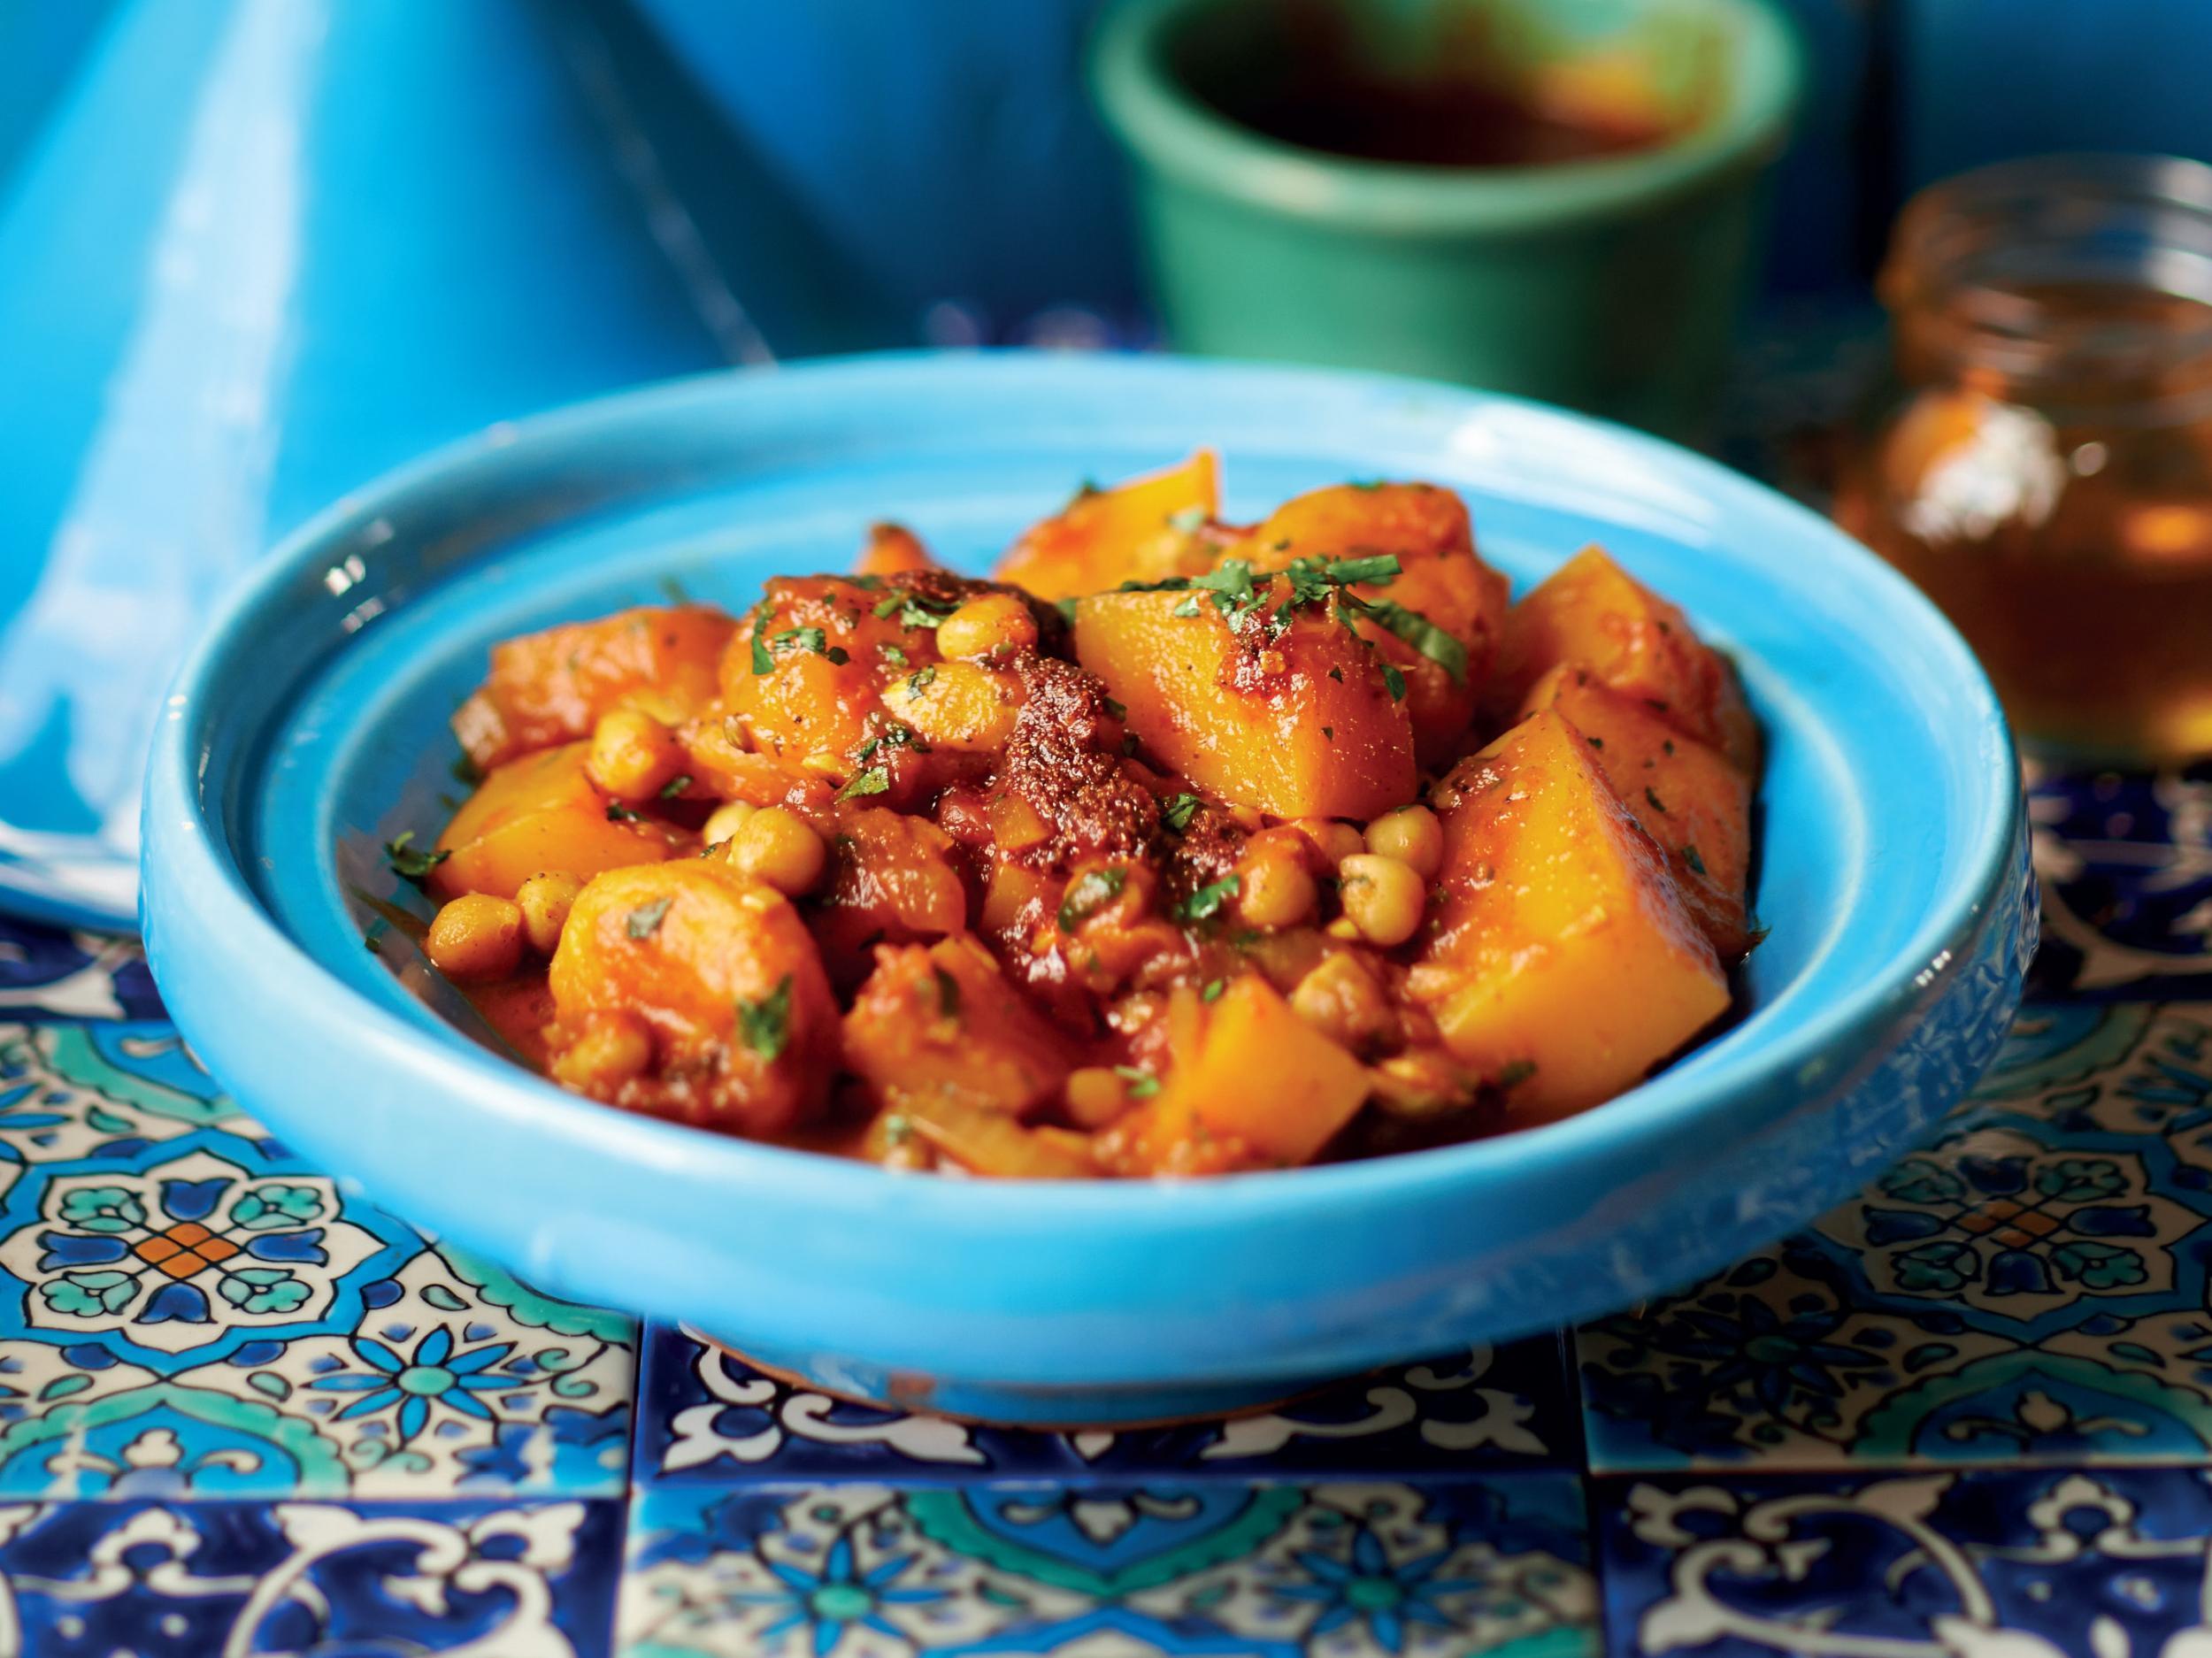 This fragrant tagine is quick and easy to make